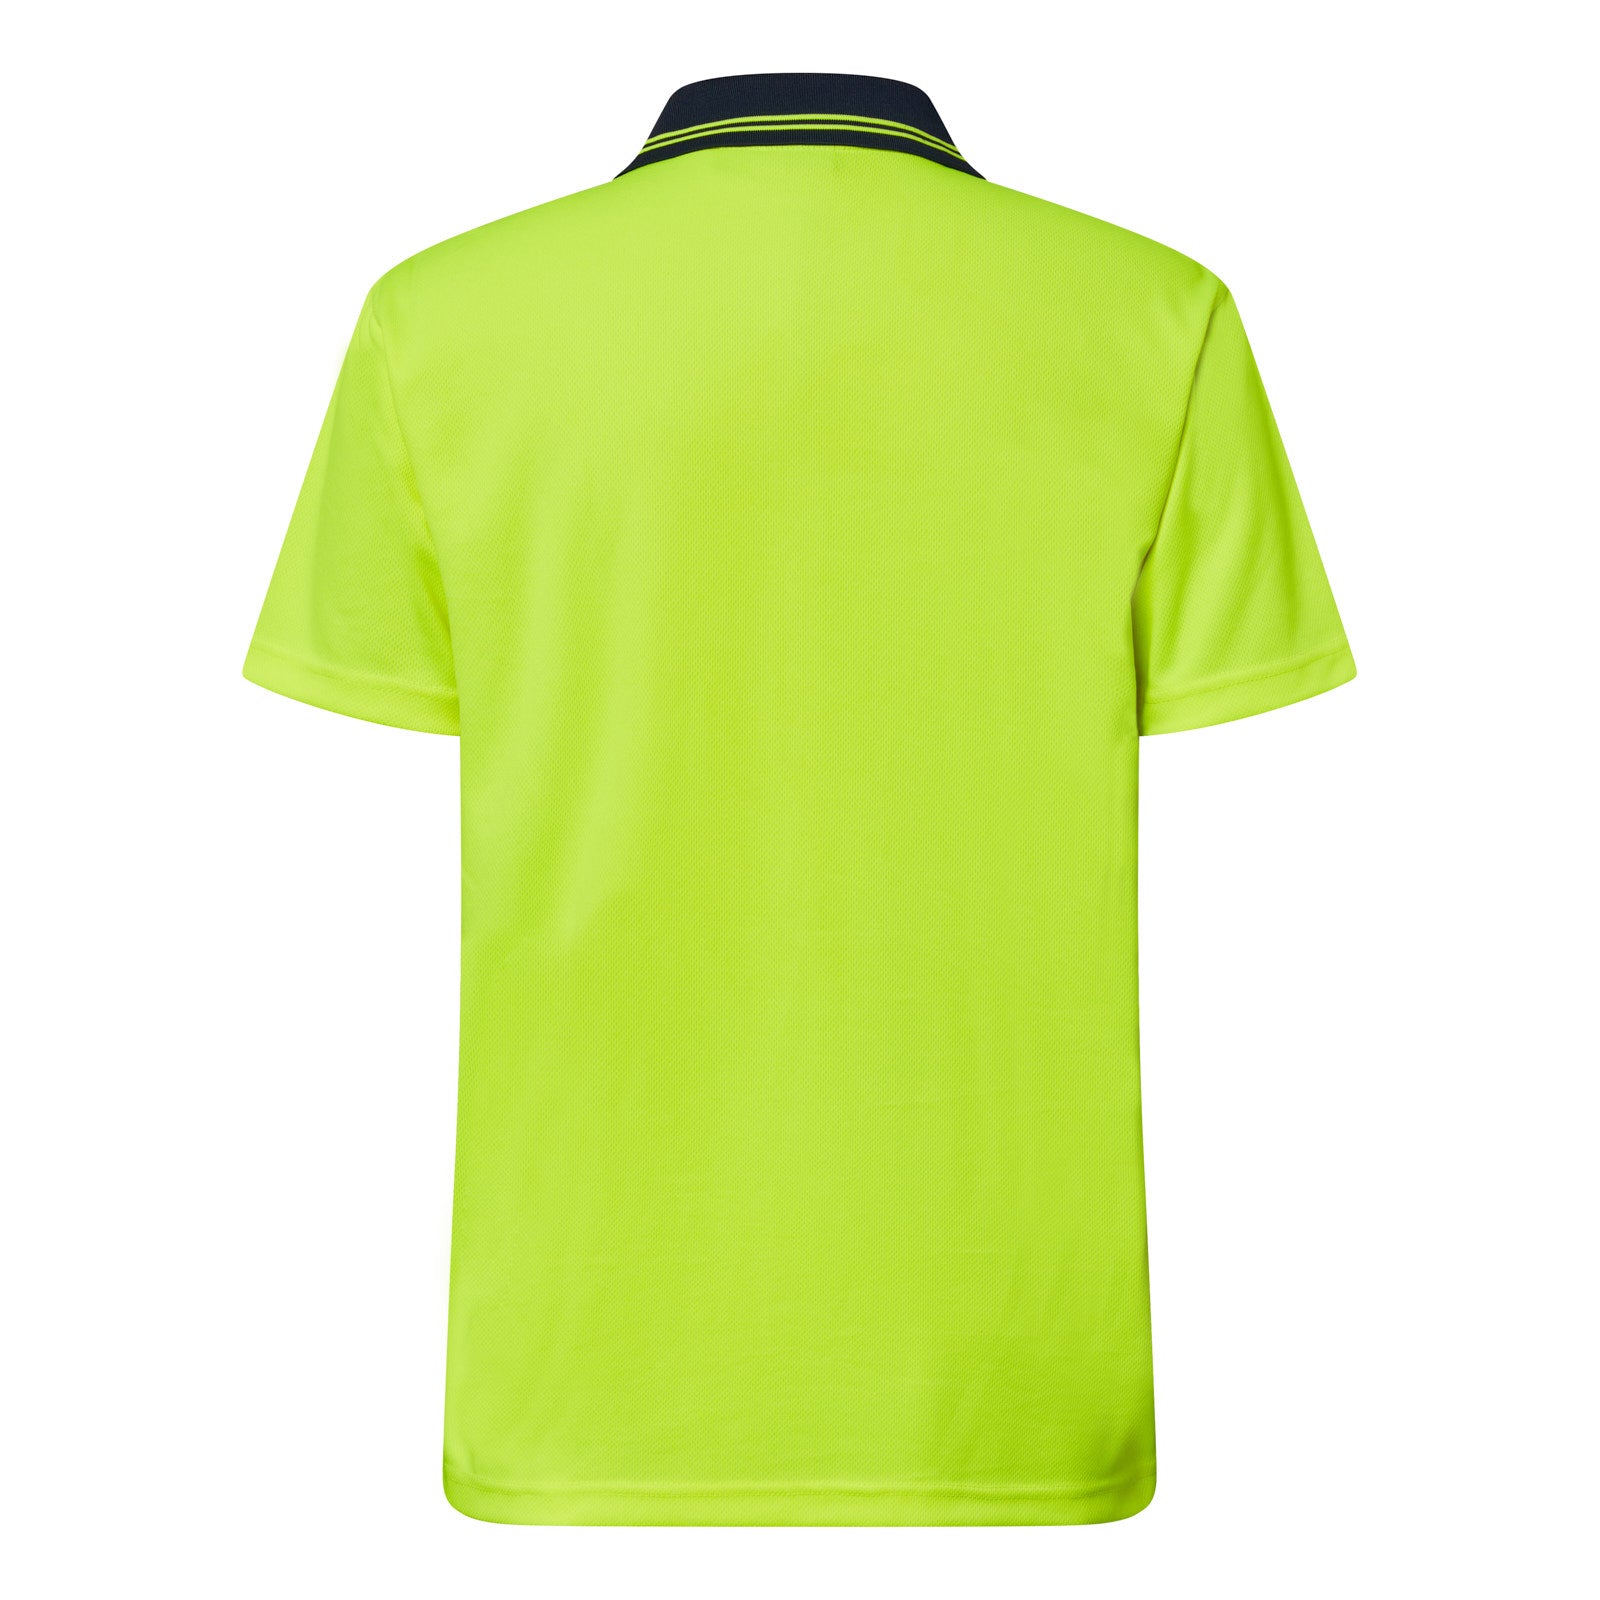 Hi Vis Two Tone Short Sleeve Polo Pocket - made by Workcraft